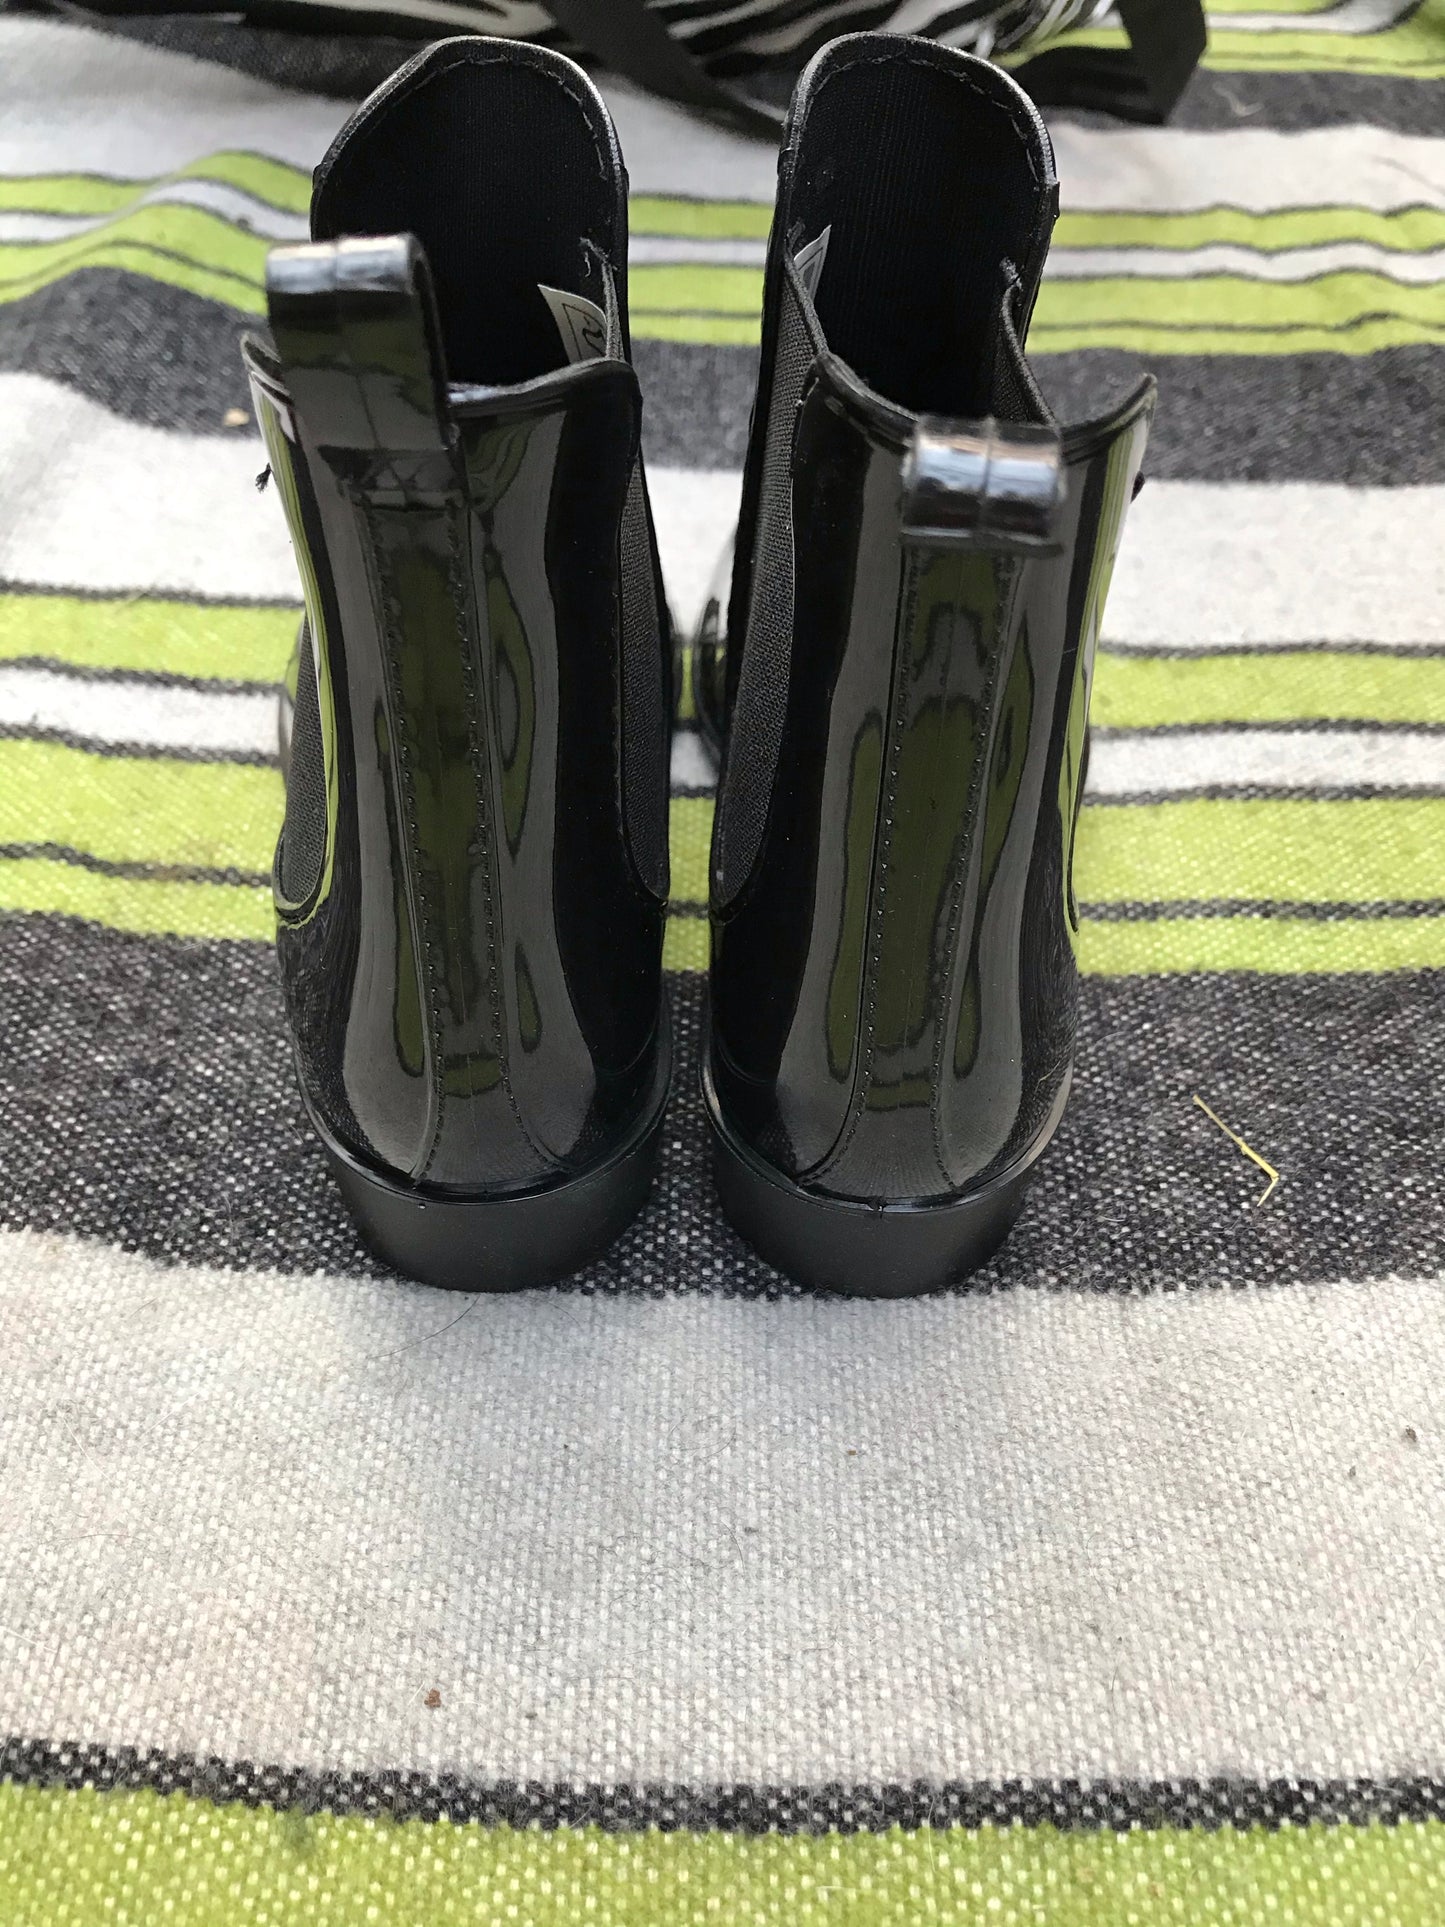 new size 5 black patent chelsea boots FREE POSTAGE ✅